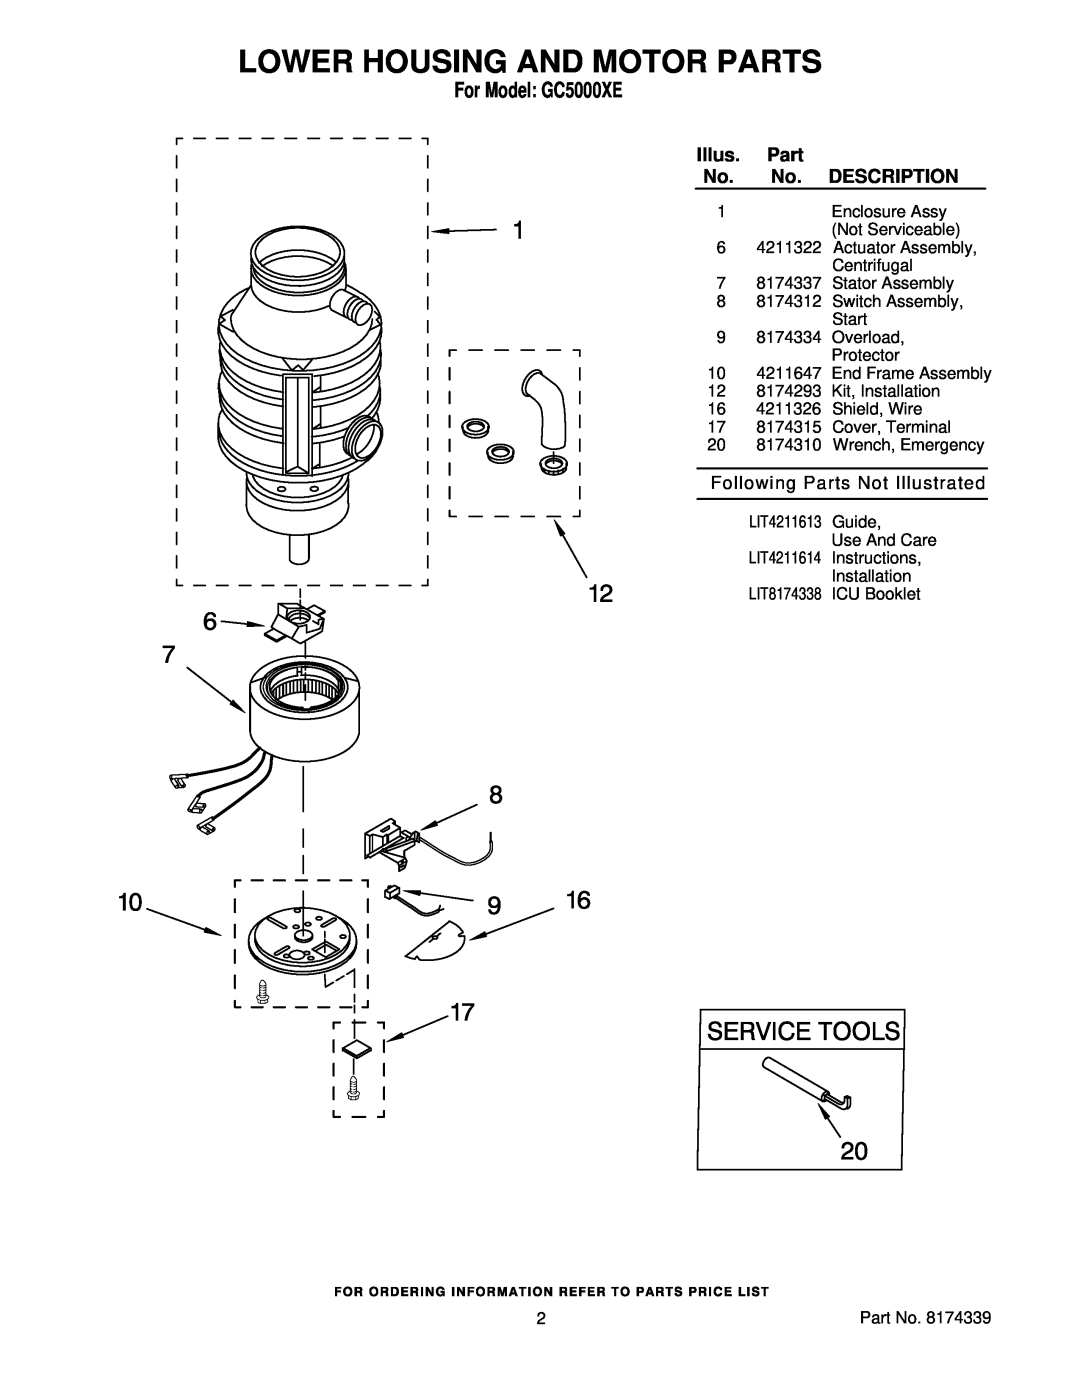 Whirlpool manual Lower Housing And Motor Parts, For Model GC5000XE, Description, Following Parts Not Illustrated 